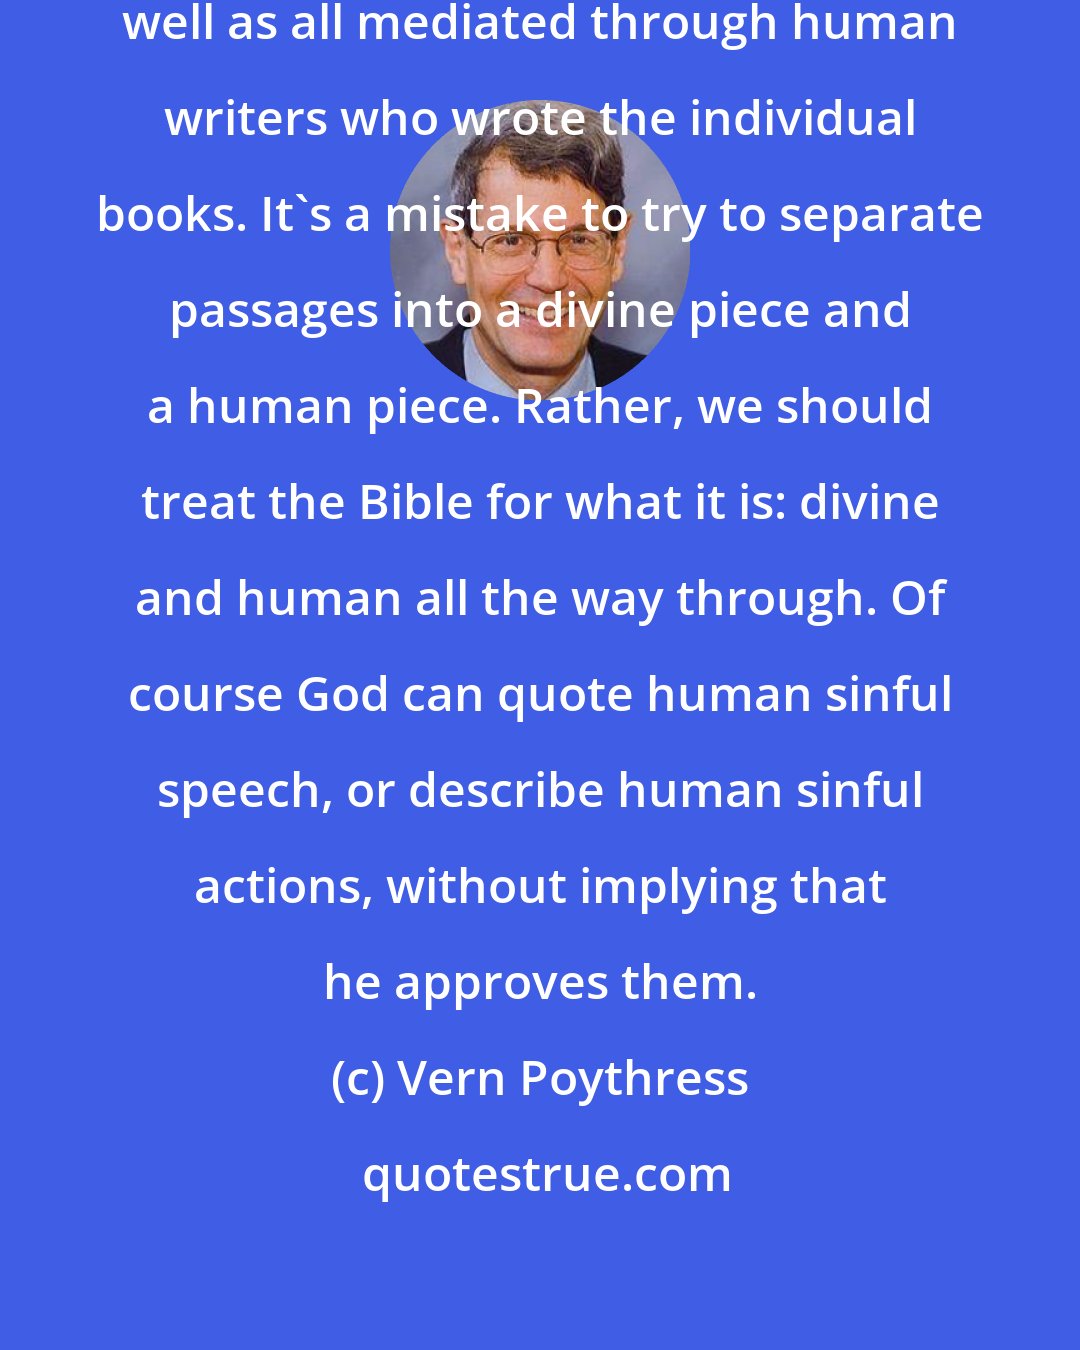 Vern Poythress: The Bible is all God's speech, as well as all mediated through human writers who wrote the individual books. It's a mistake to try to separate passages into a divine piece and a human piece. Rather, we should treat the Bible for what it is: divine and human all the way through. Of course God can quote human sinful speech, or describe human sinful actions, without implying that he approves them.